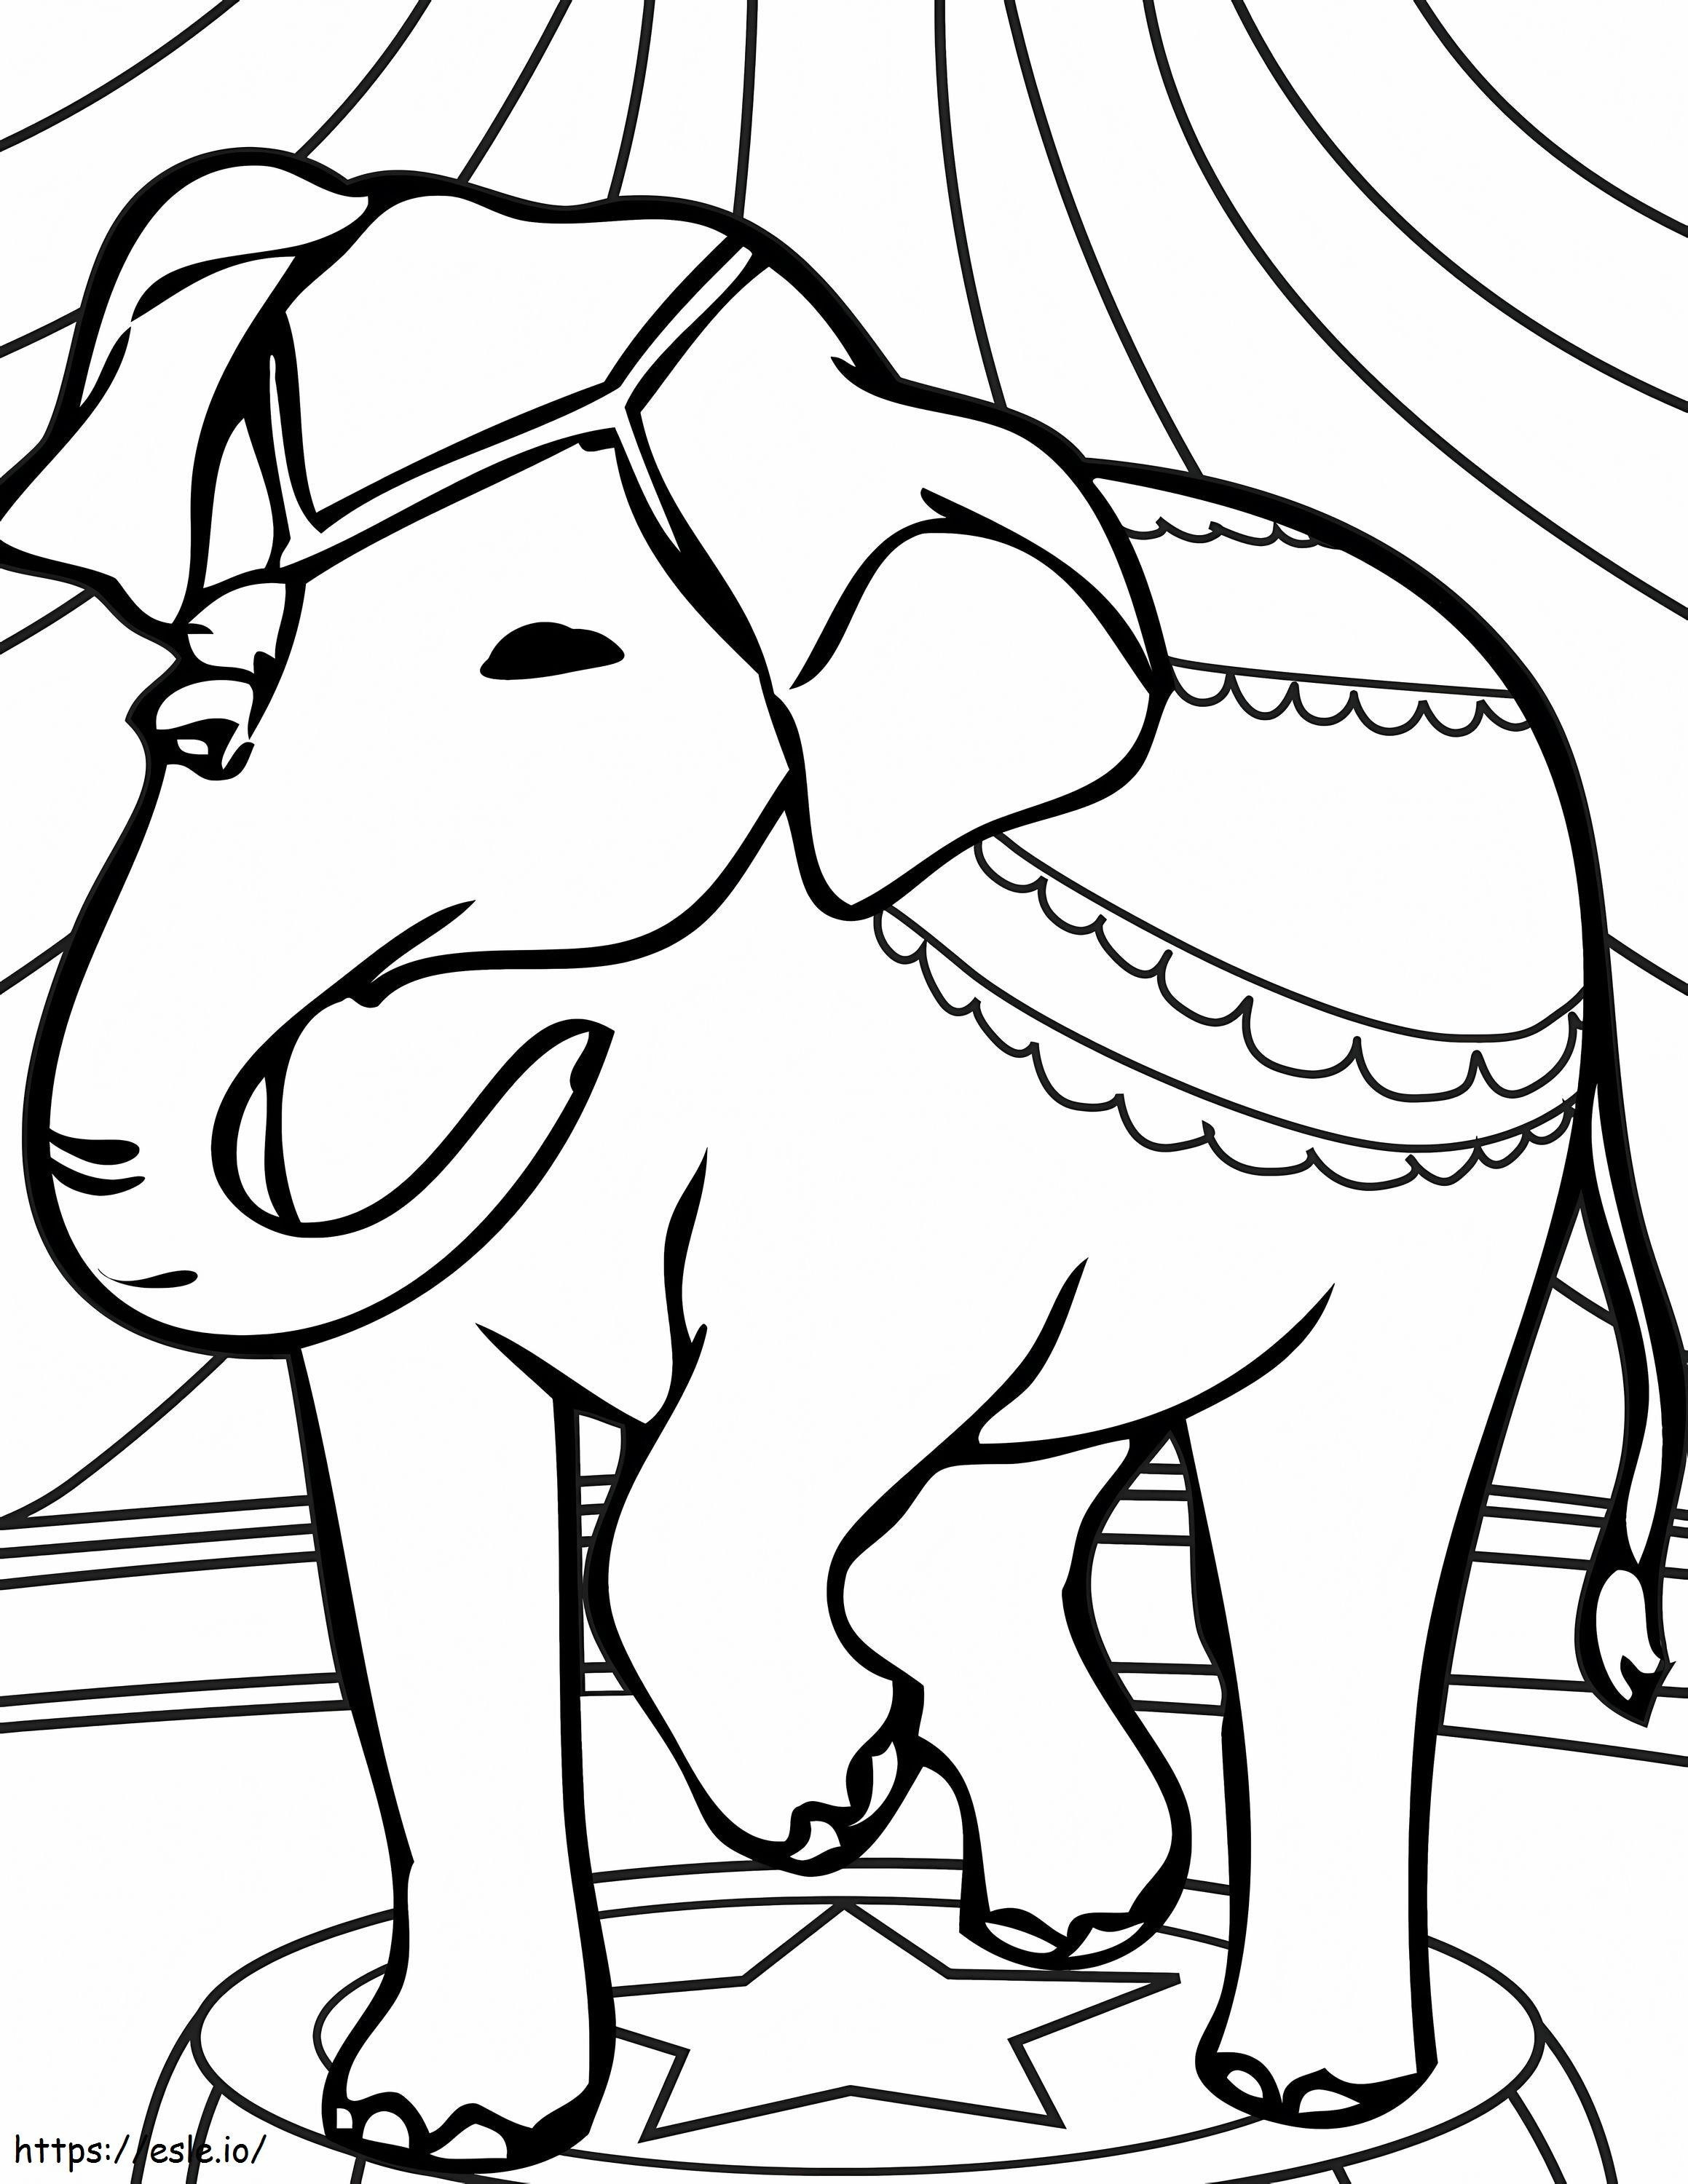 1548128776 Elephant Of Elephant Printable coloring page